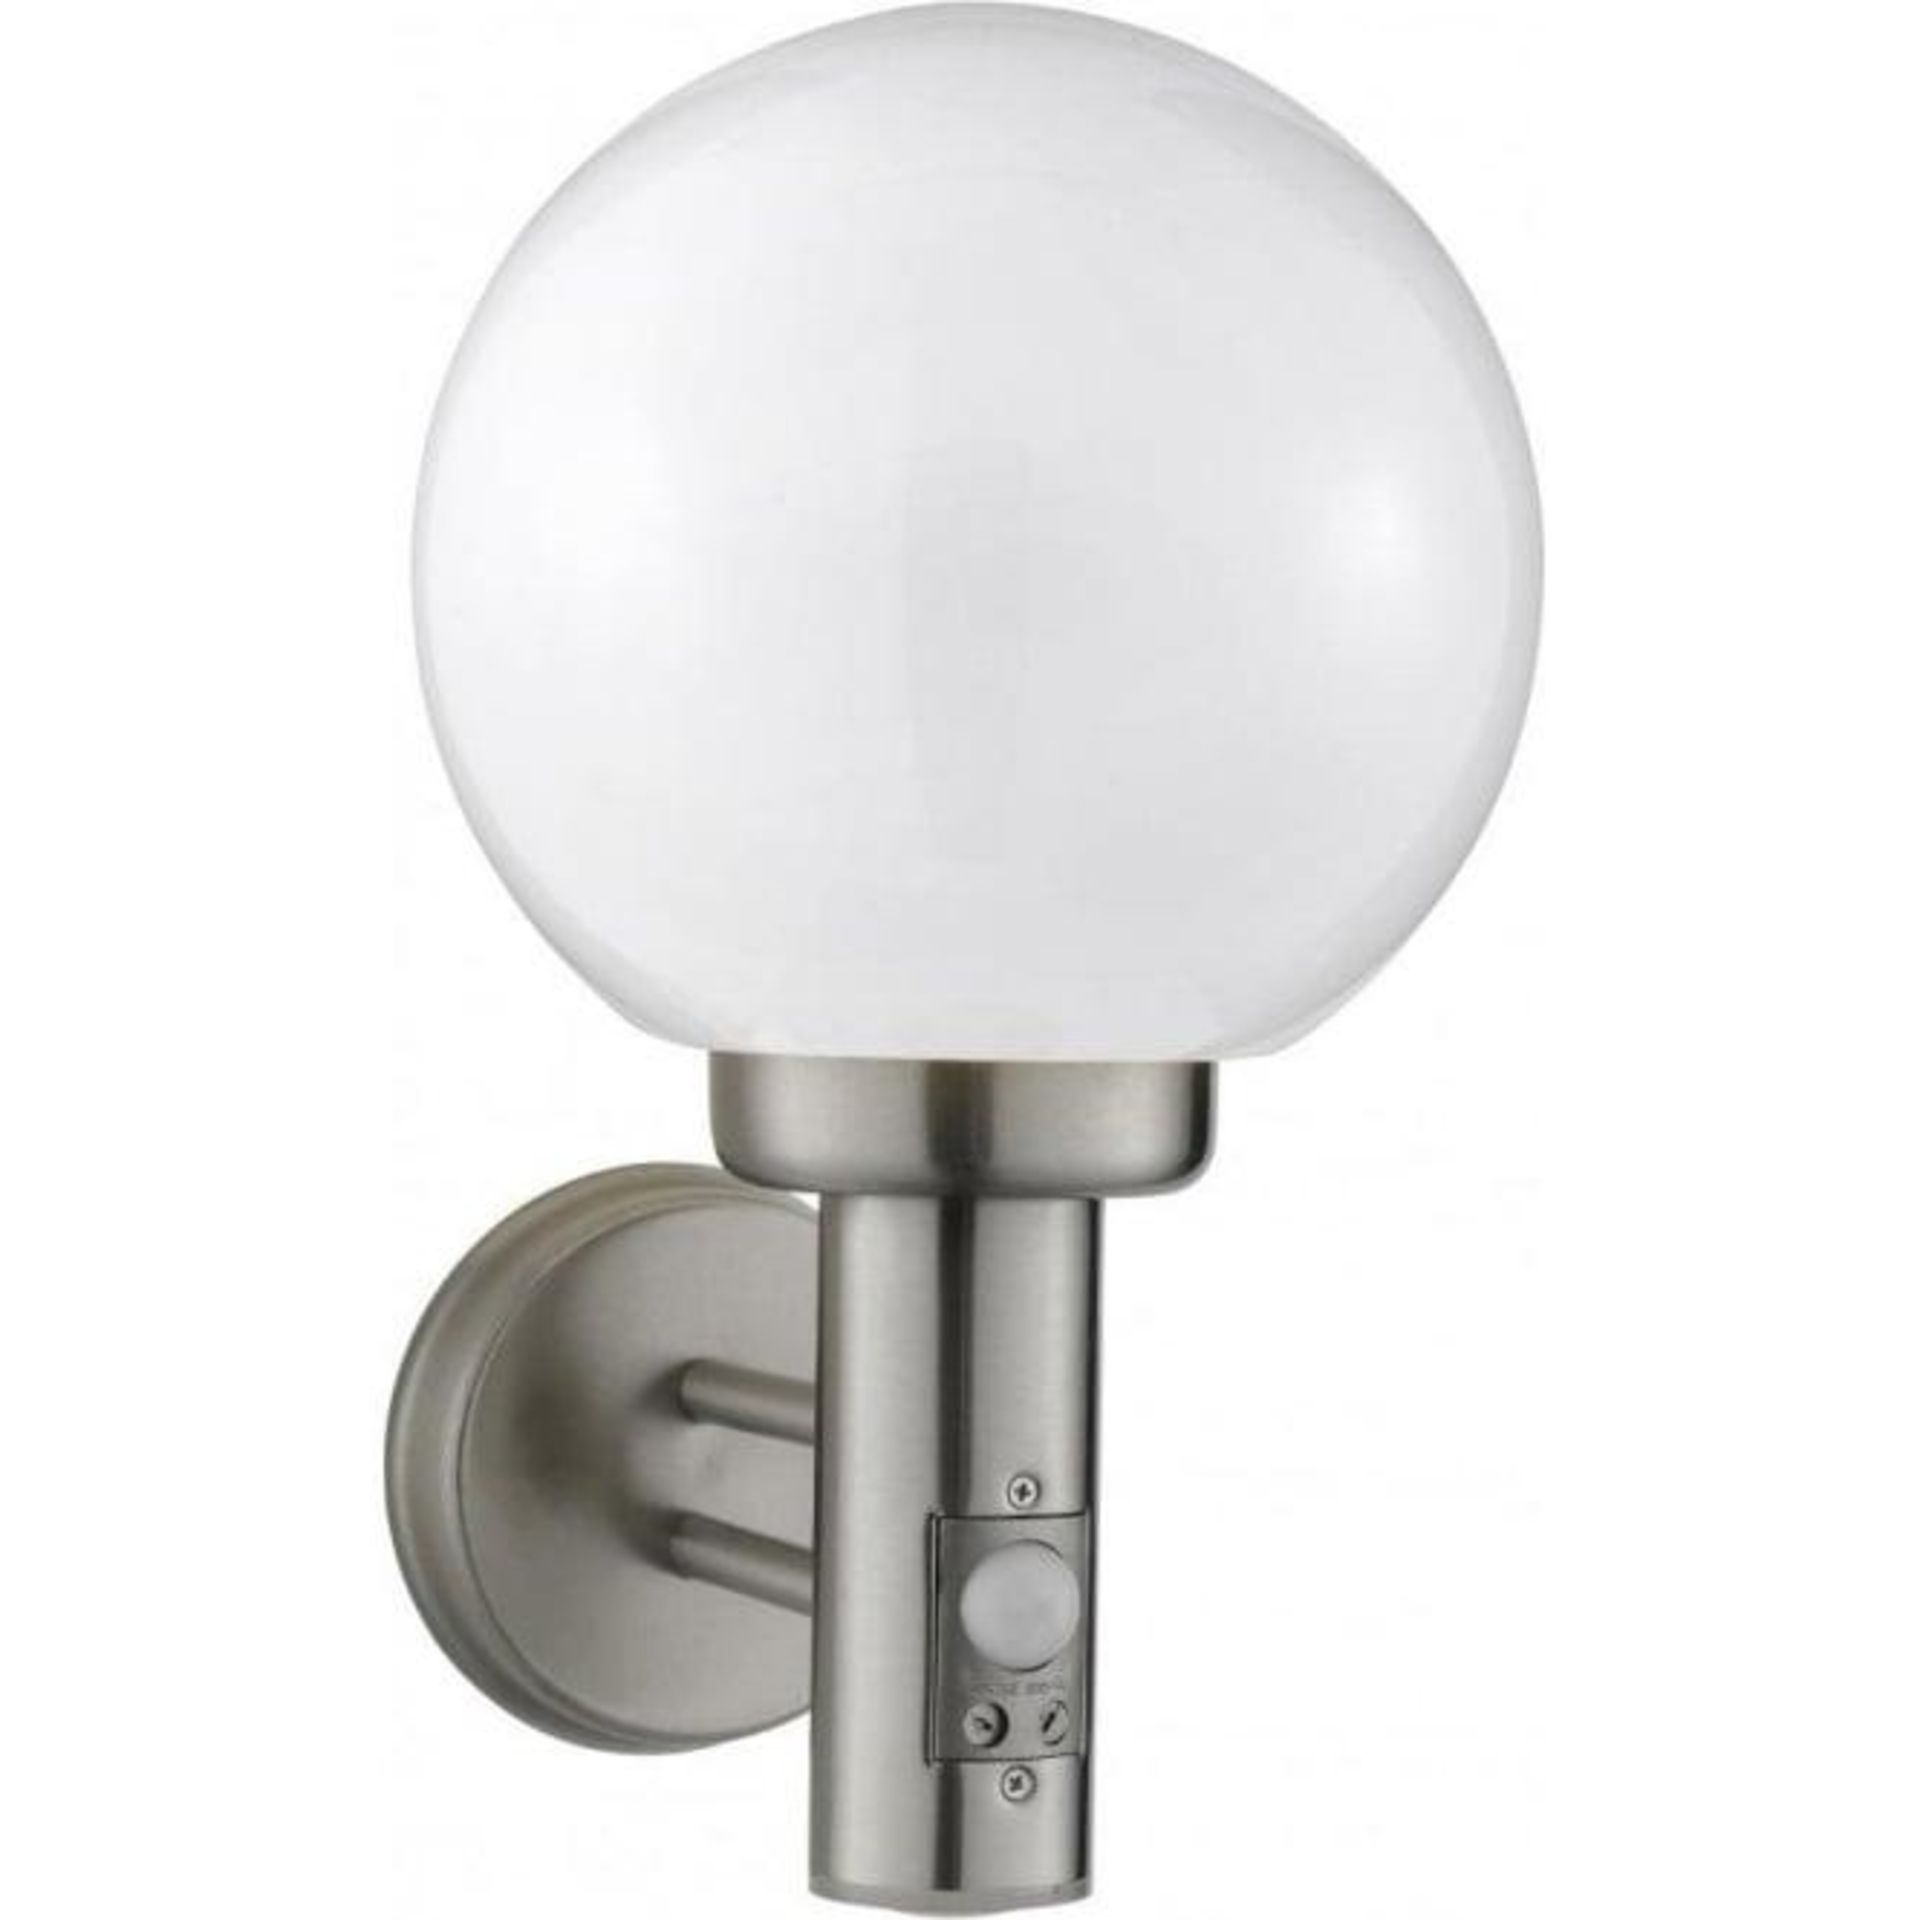 1 x Globe Outdoor Wall Light With PIR Motion Sensor - Stainless Steel With Polycarbonate Shade - IP4 - Image 2 of 2